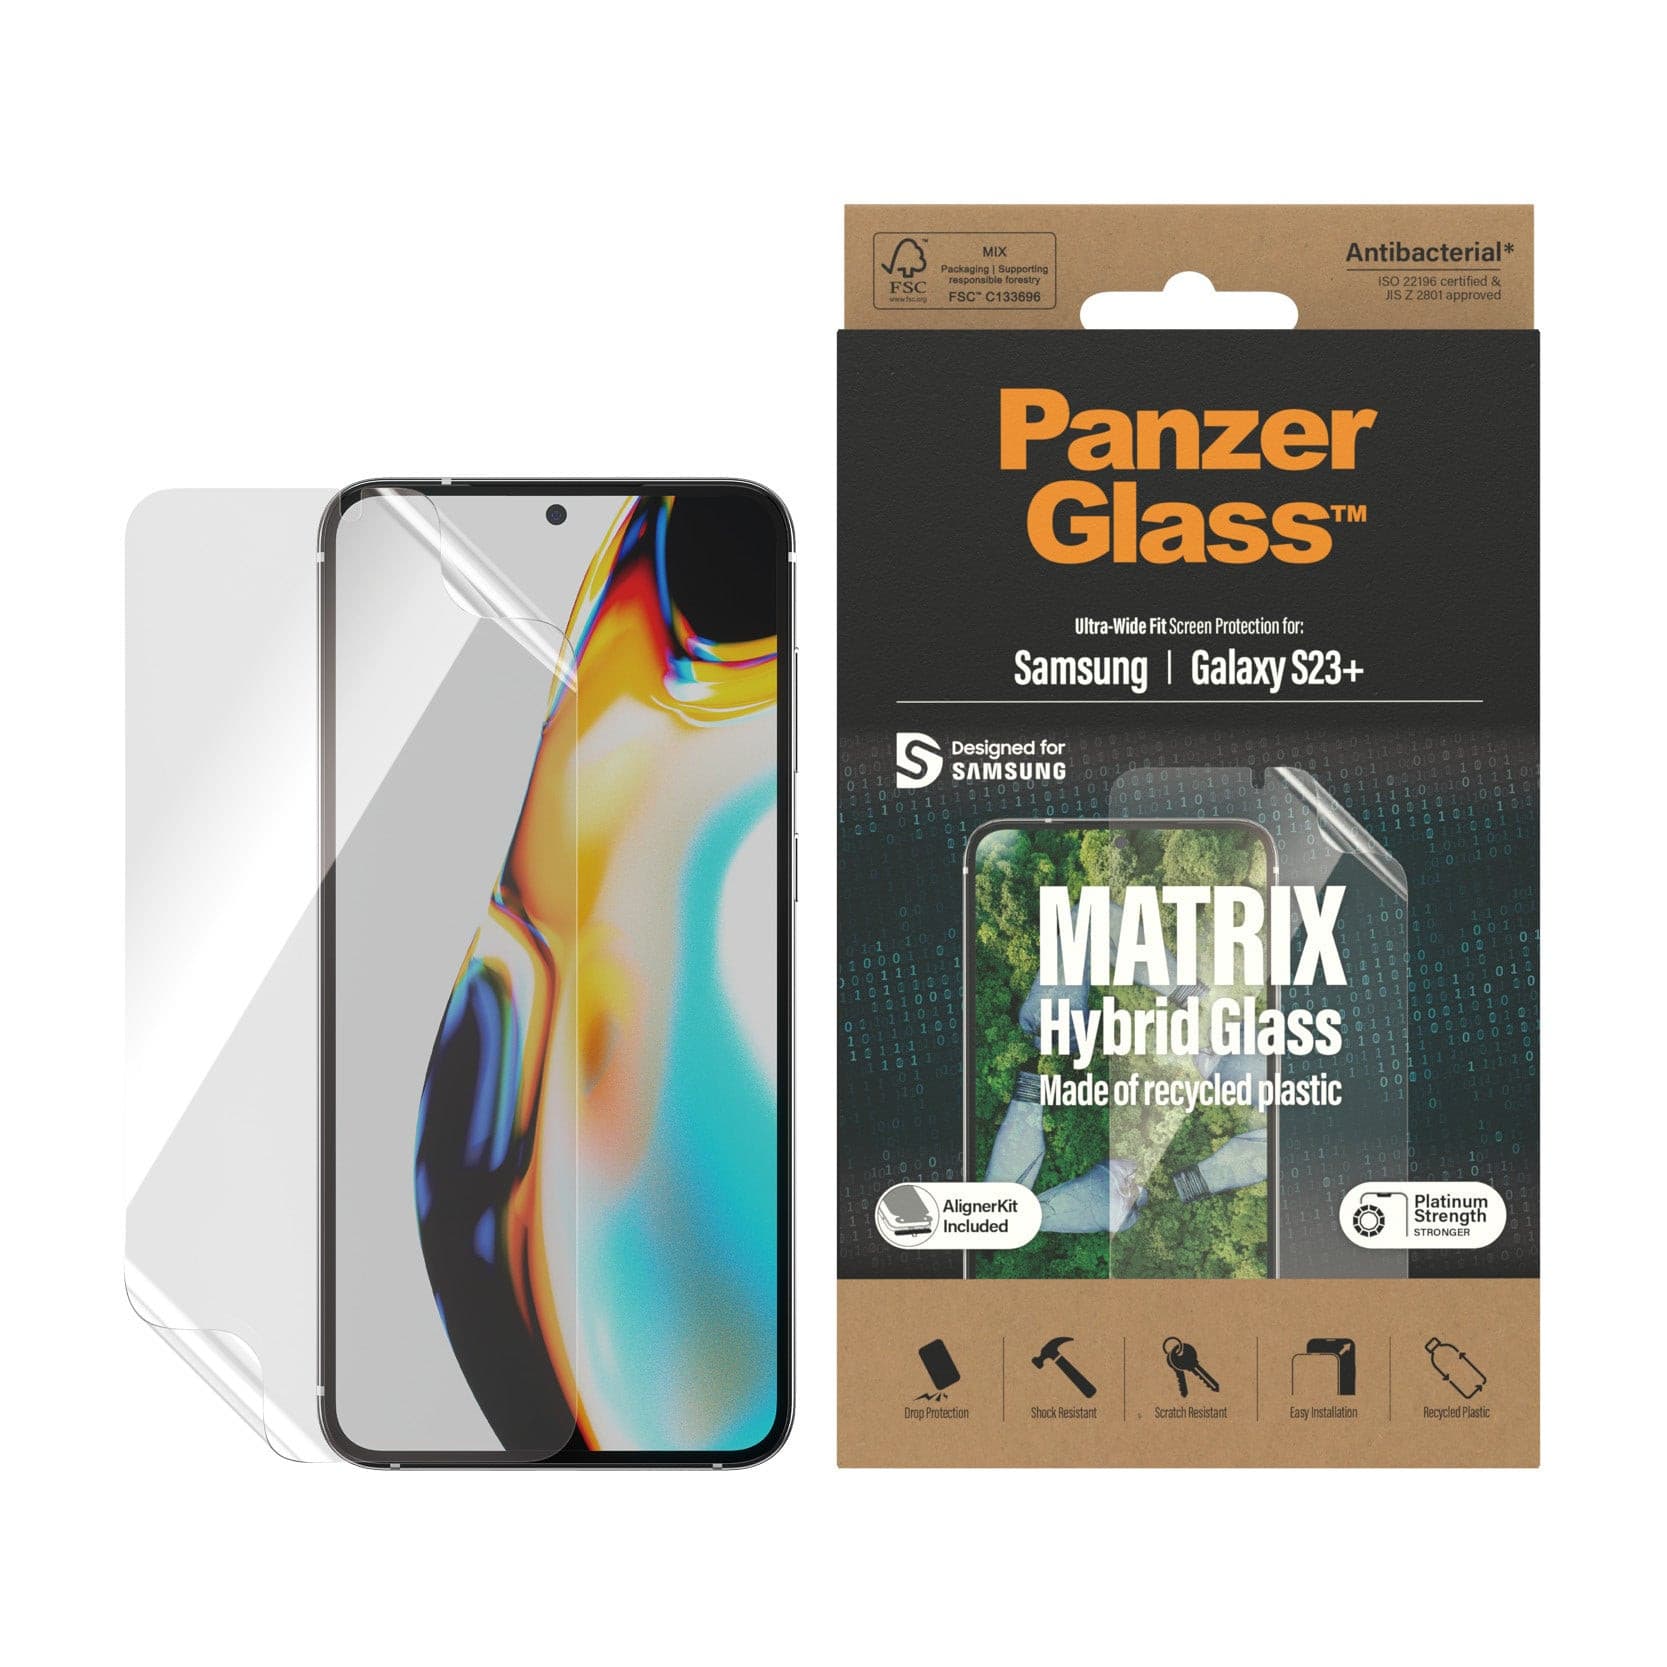 PanzerGlass™ Matrix Hybrid Glass with EasyAligner Screen Protector for Samsung Galaxy S23 Plus.